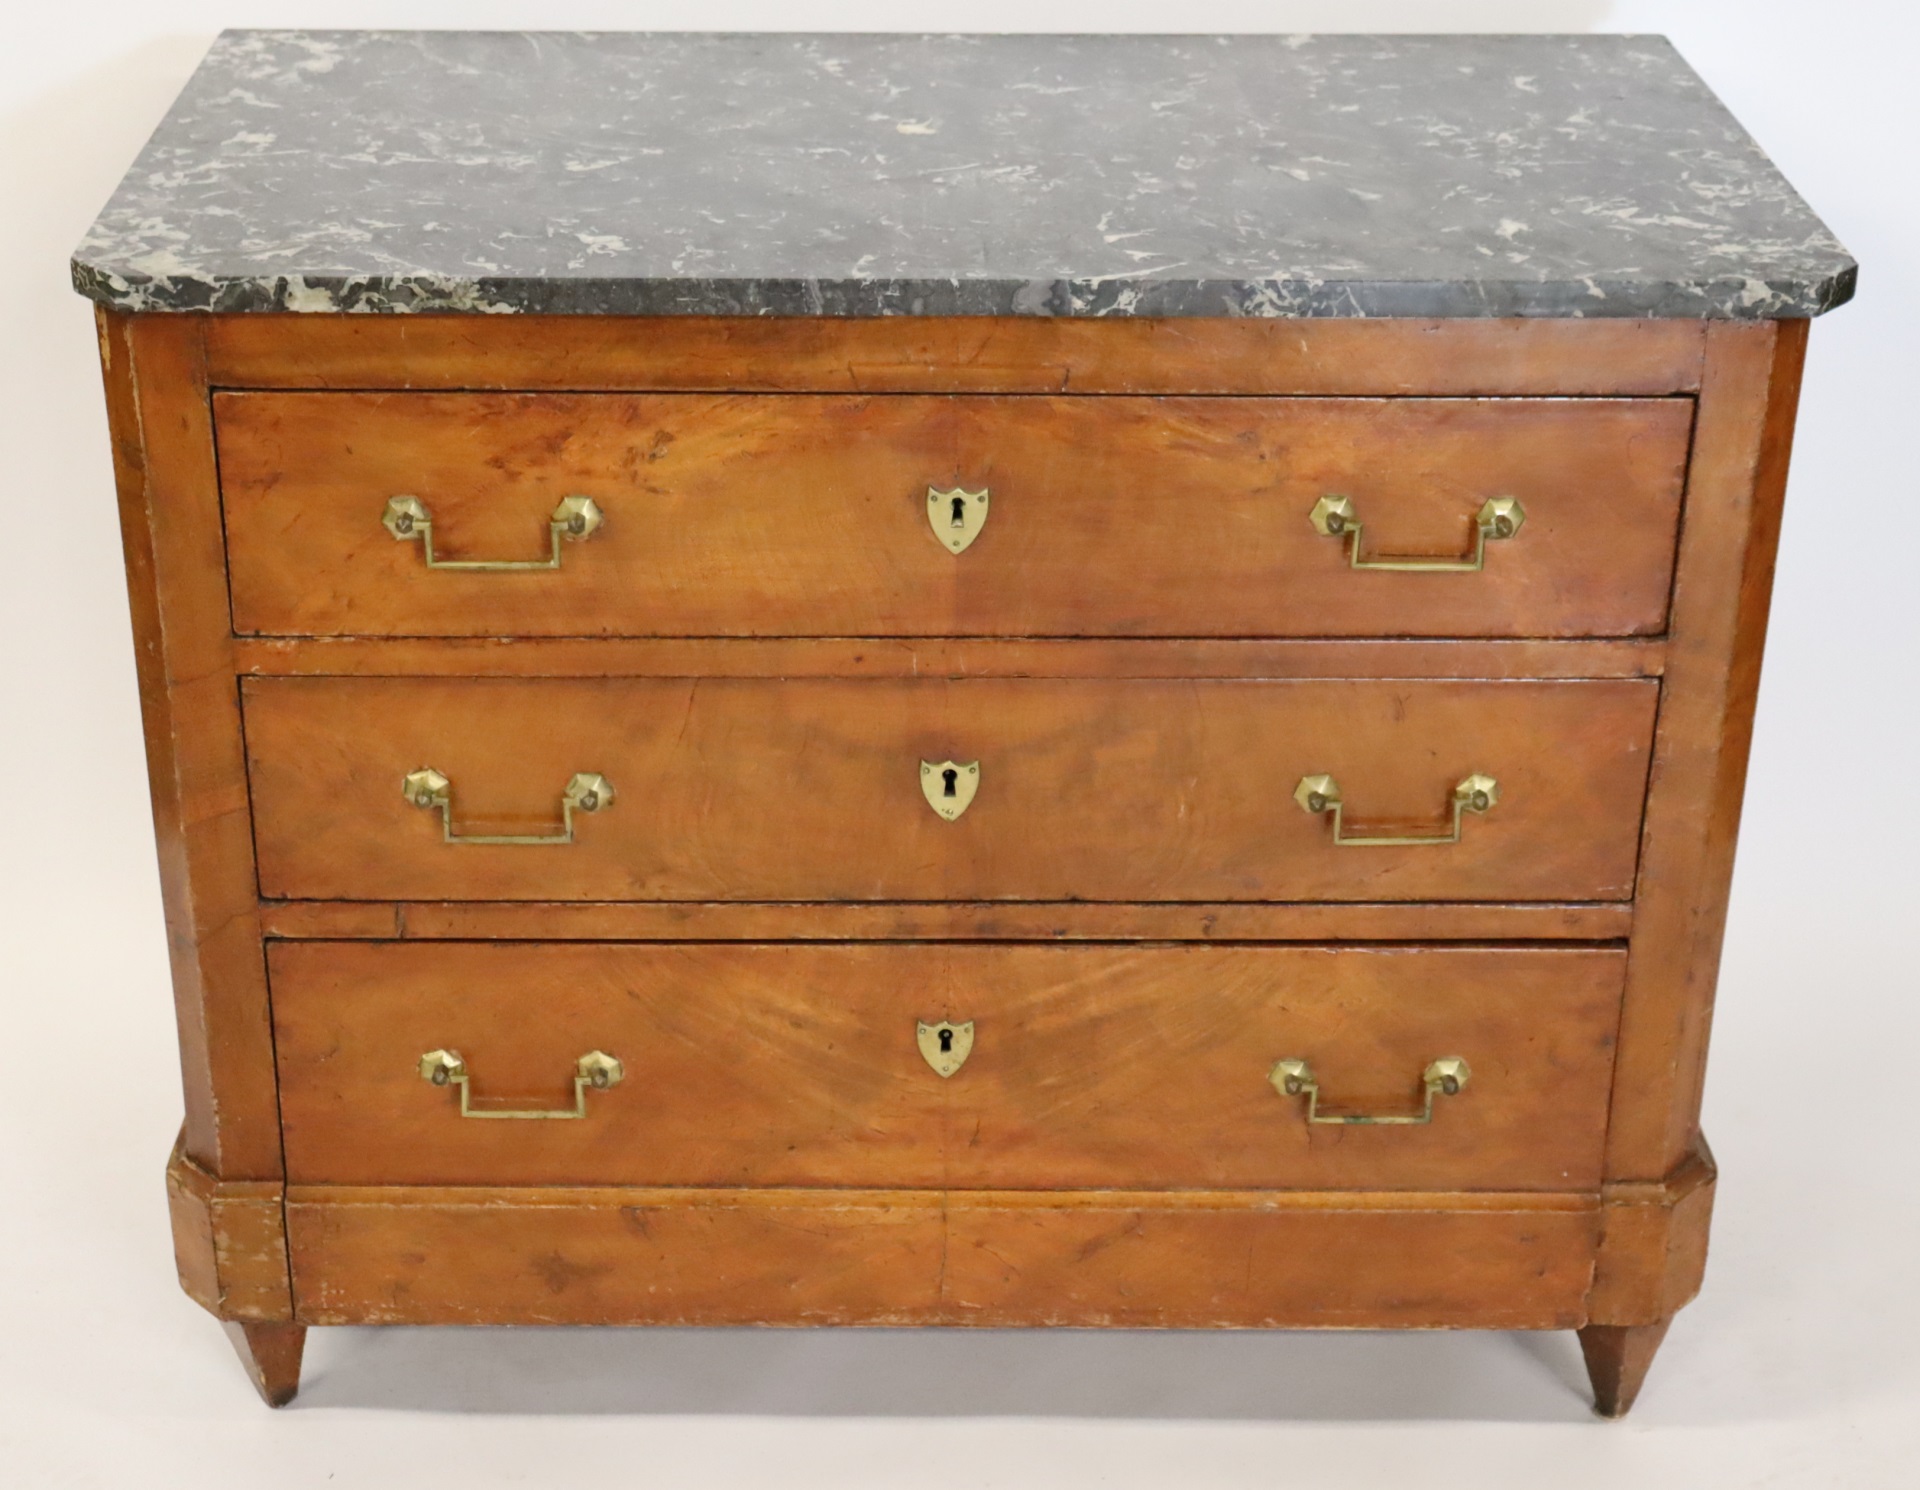 ANTIQUE CONTINENTAL MARBLETOP COMMODE 3bdf17